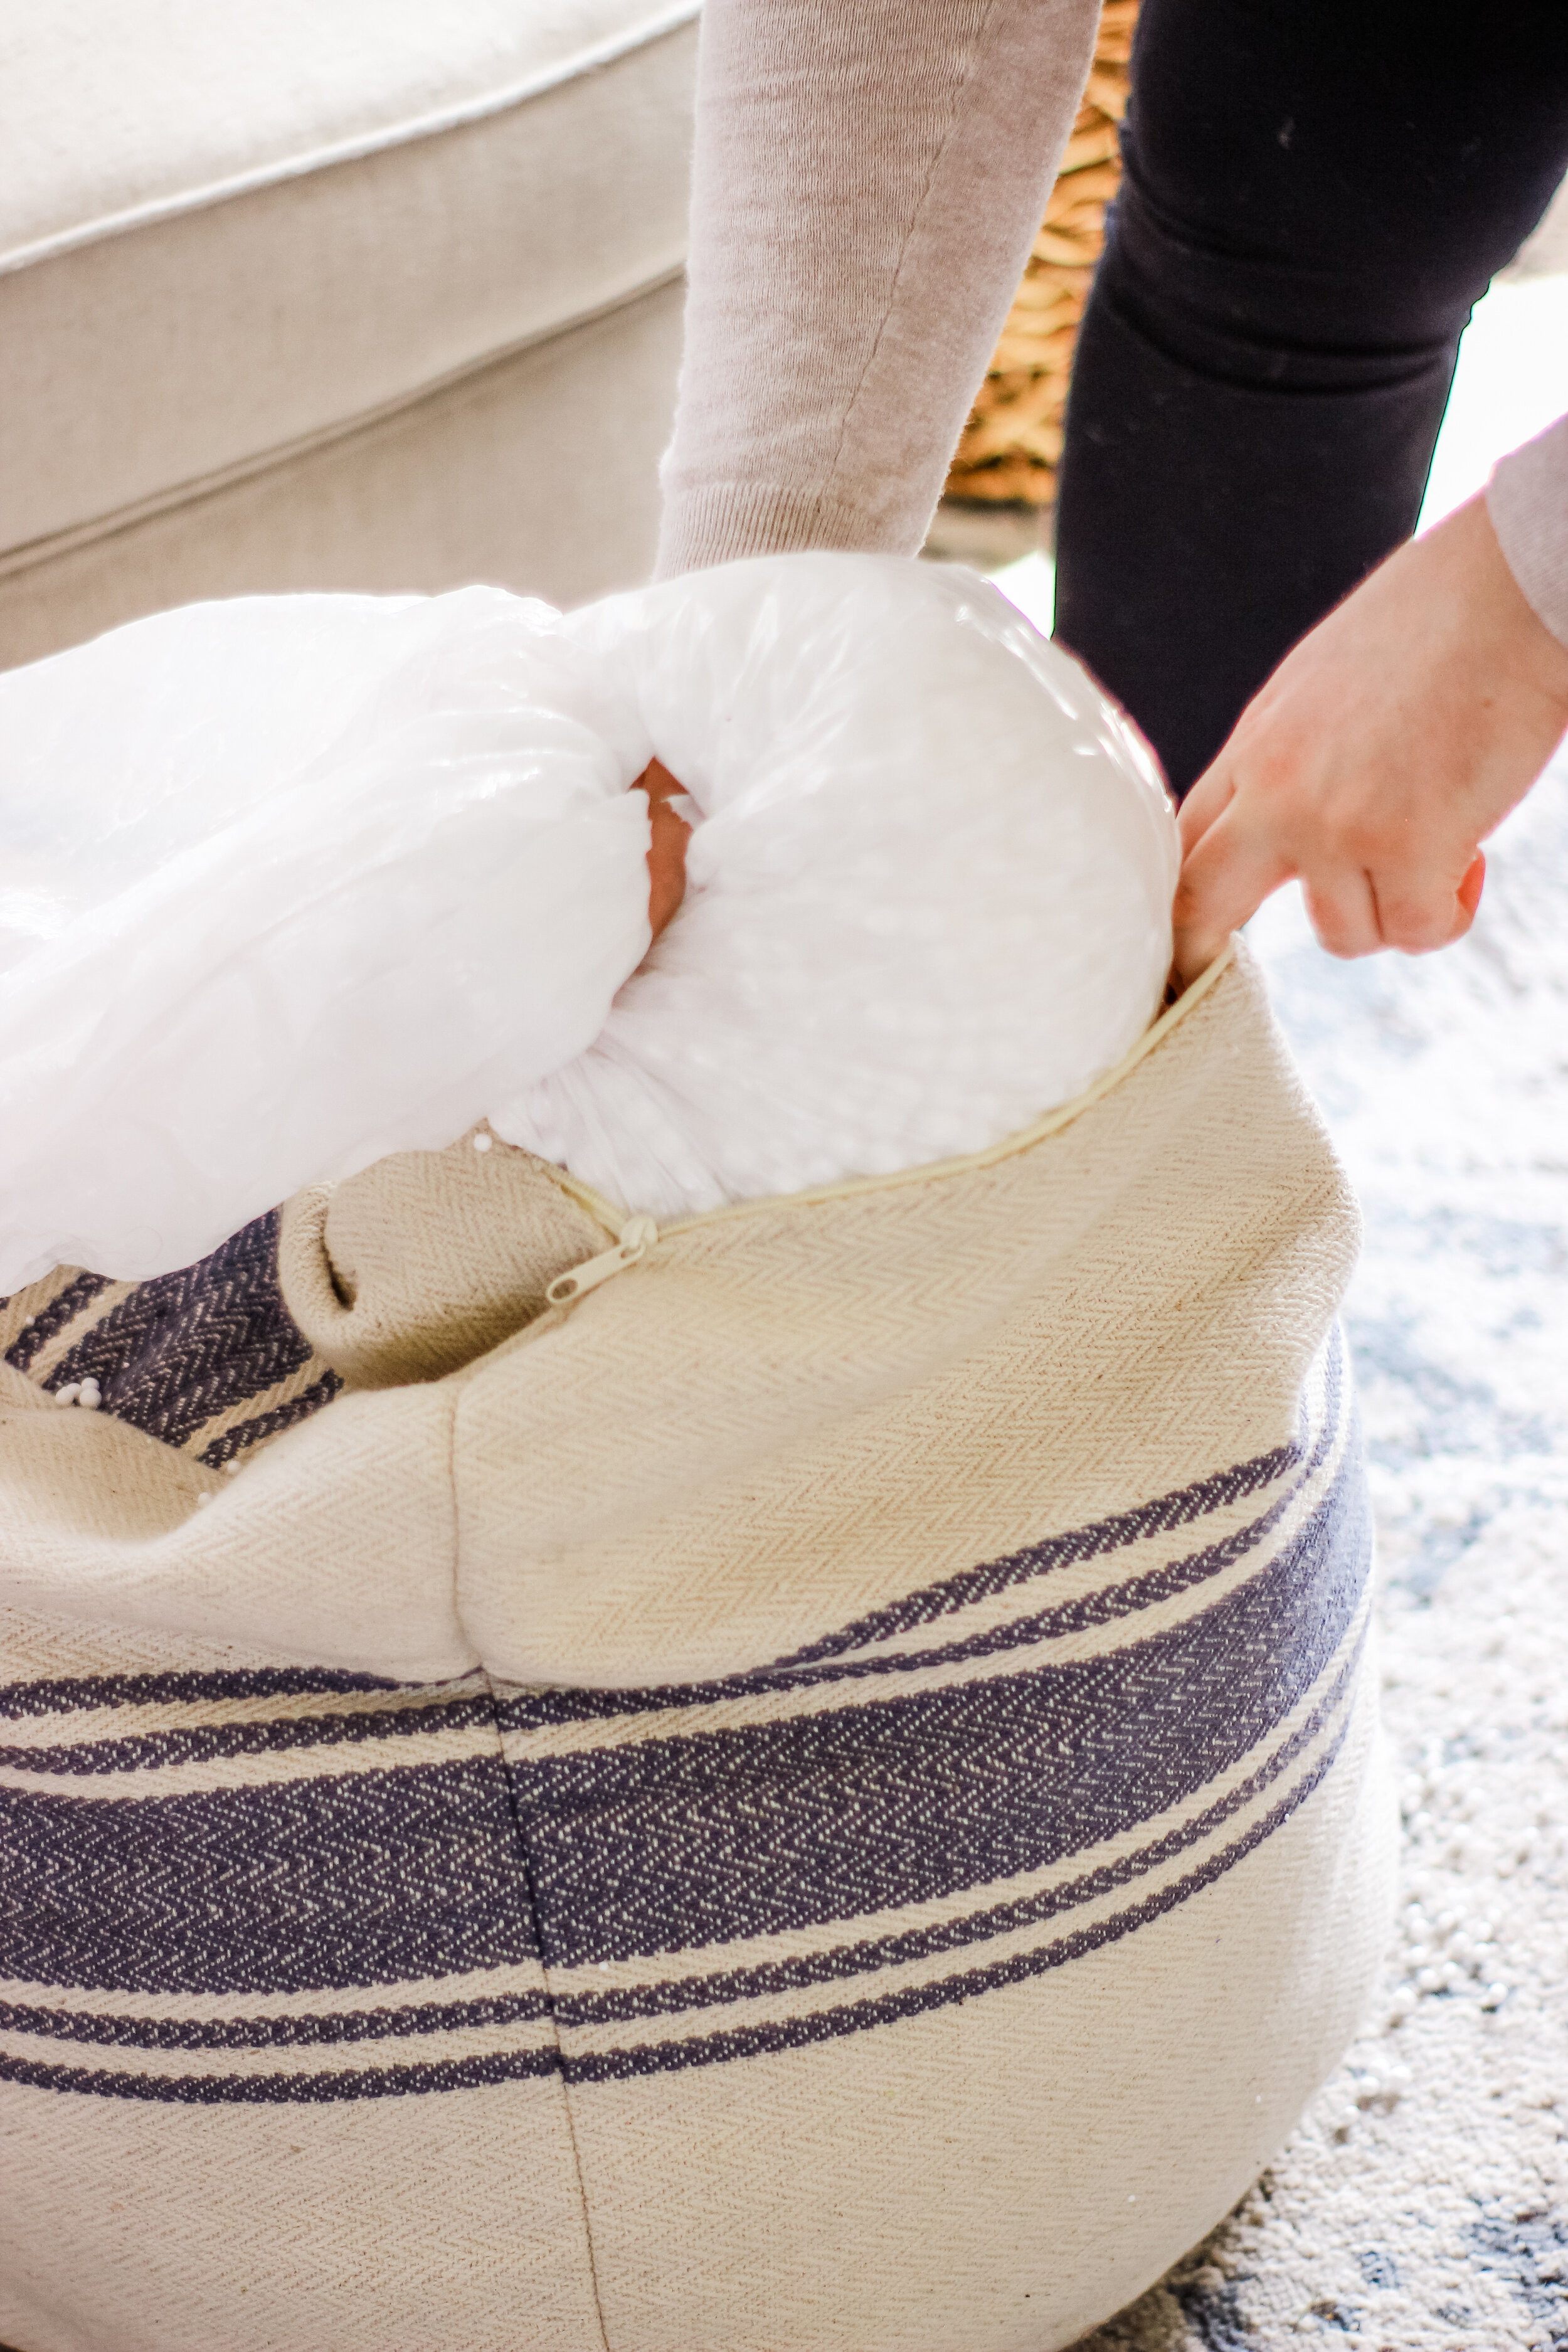 Restuffing a Deflated Pouf in 8 steps (and adding a zipper